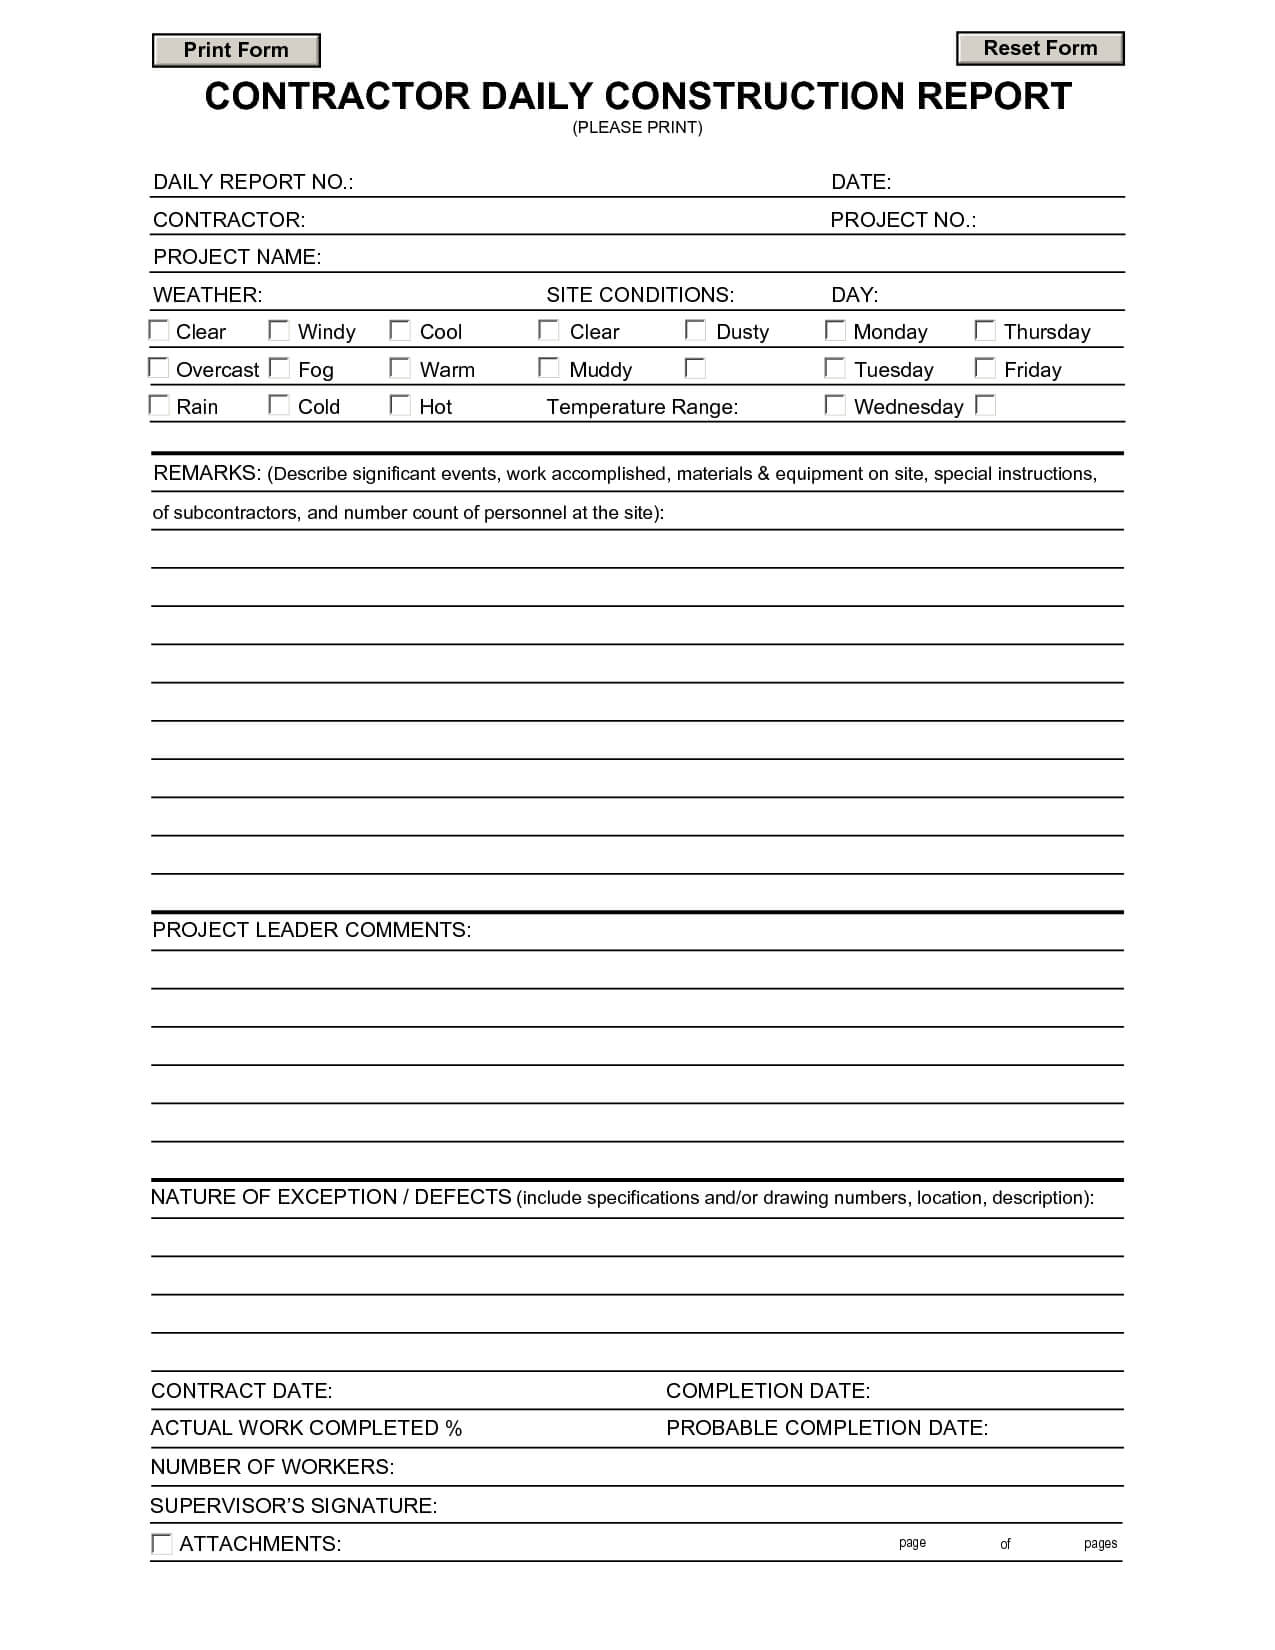 Construction Daily Report Template | Report Template, Daily Throughout Daily Reports Construction Templates